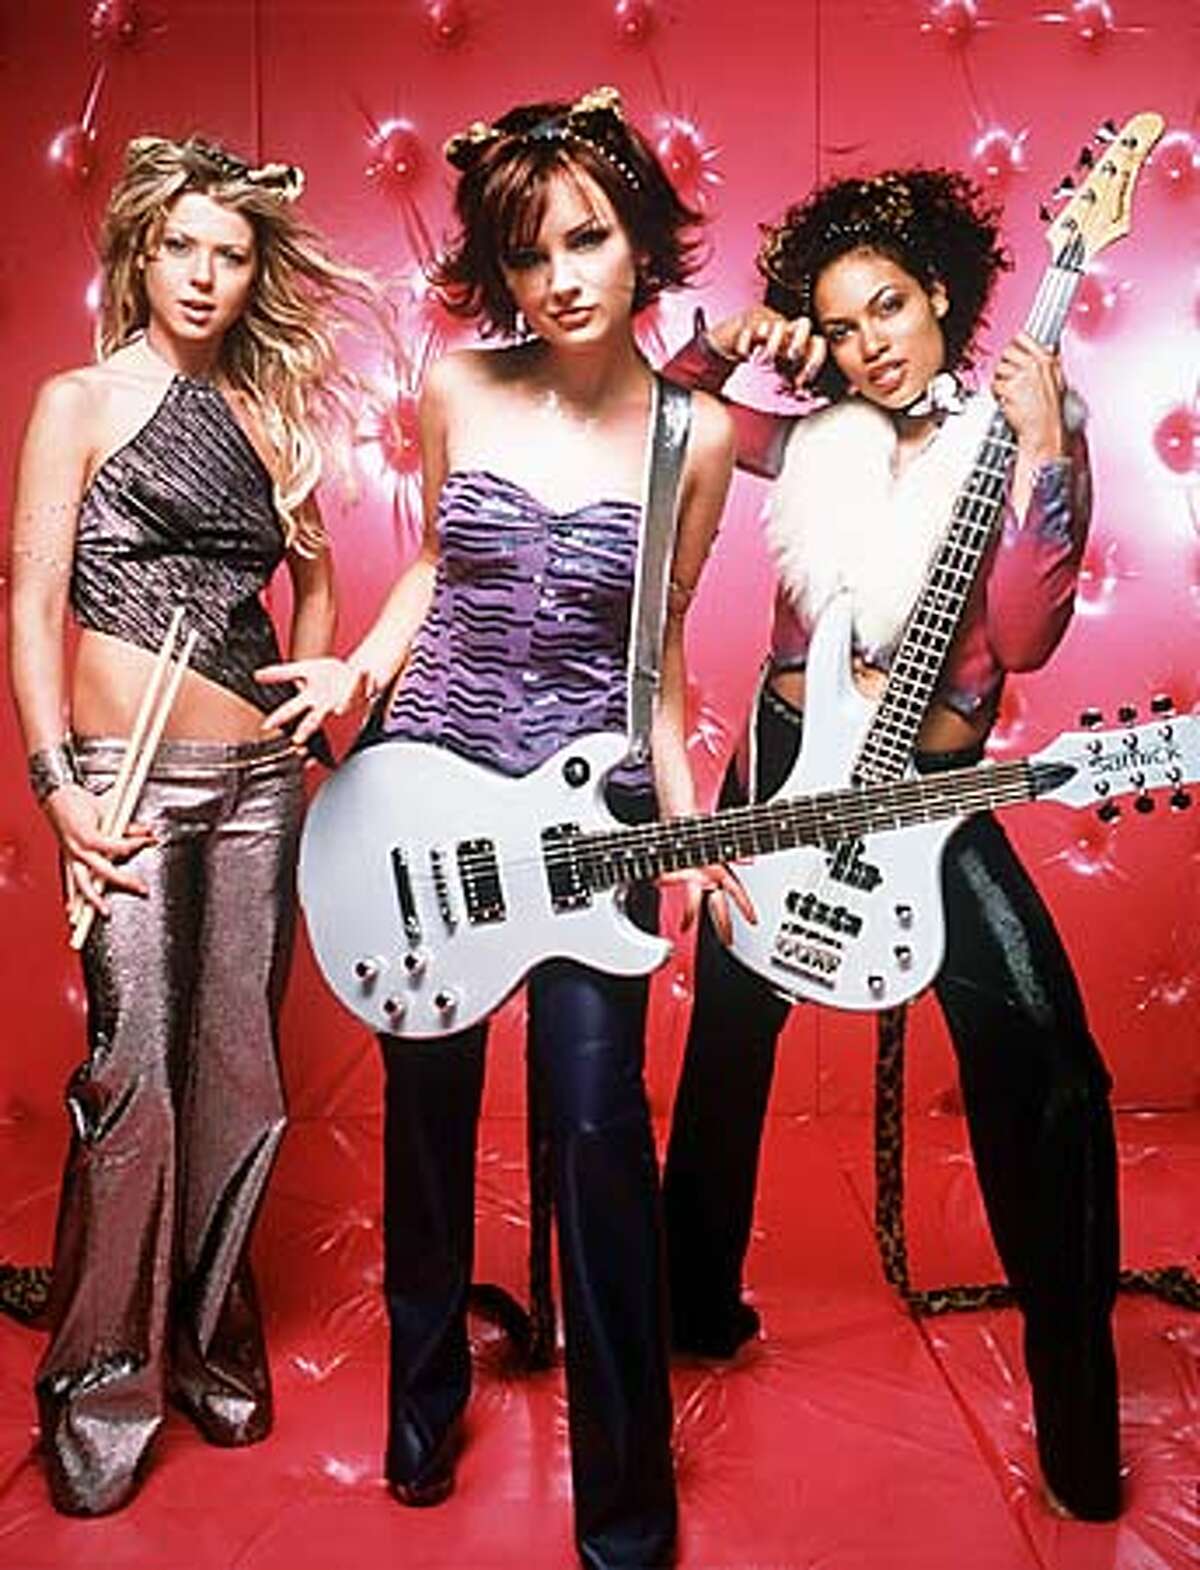 Tara Reid, Rachael Leigh Cook and Rosario Dawson (from left) in "Josie and the Pussycats." Handout Photo